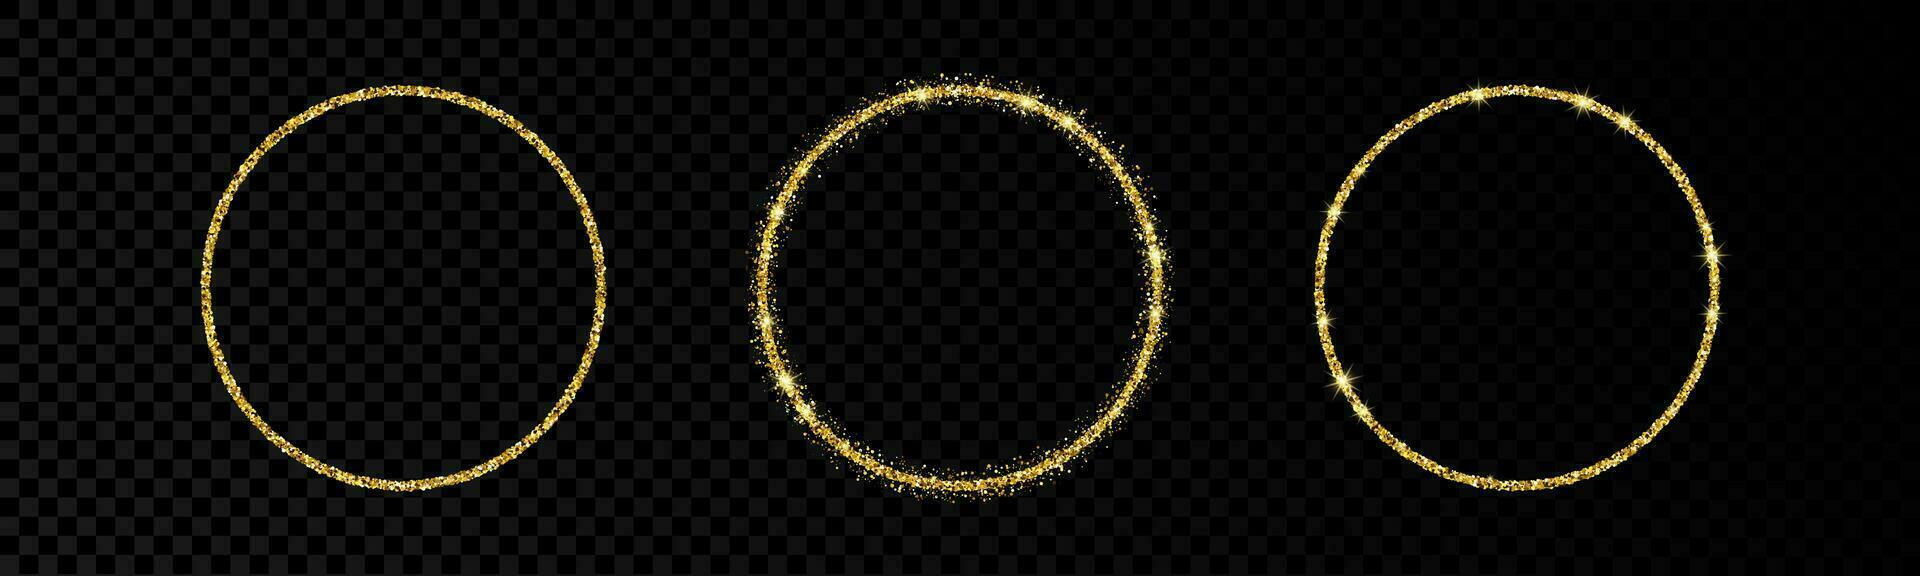 Shiny frames with glowing effects. Set of three glitter gold circular frames on background. Vector illustration